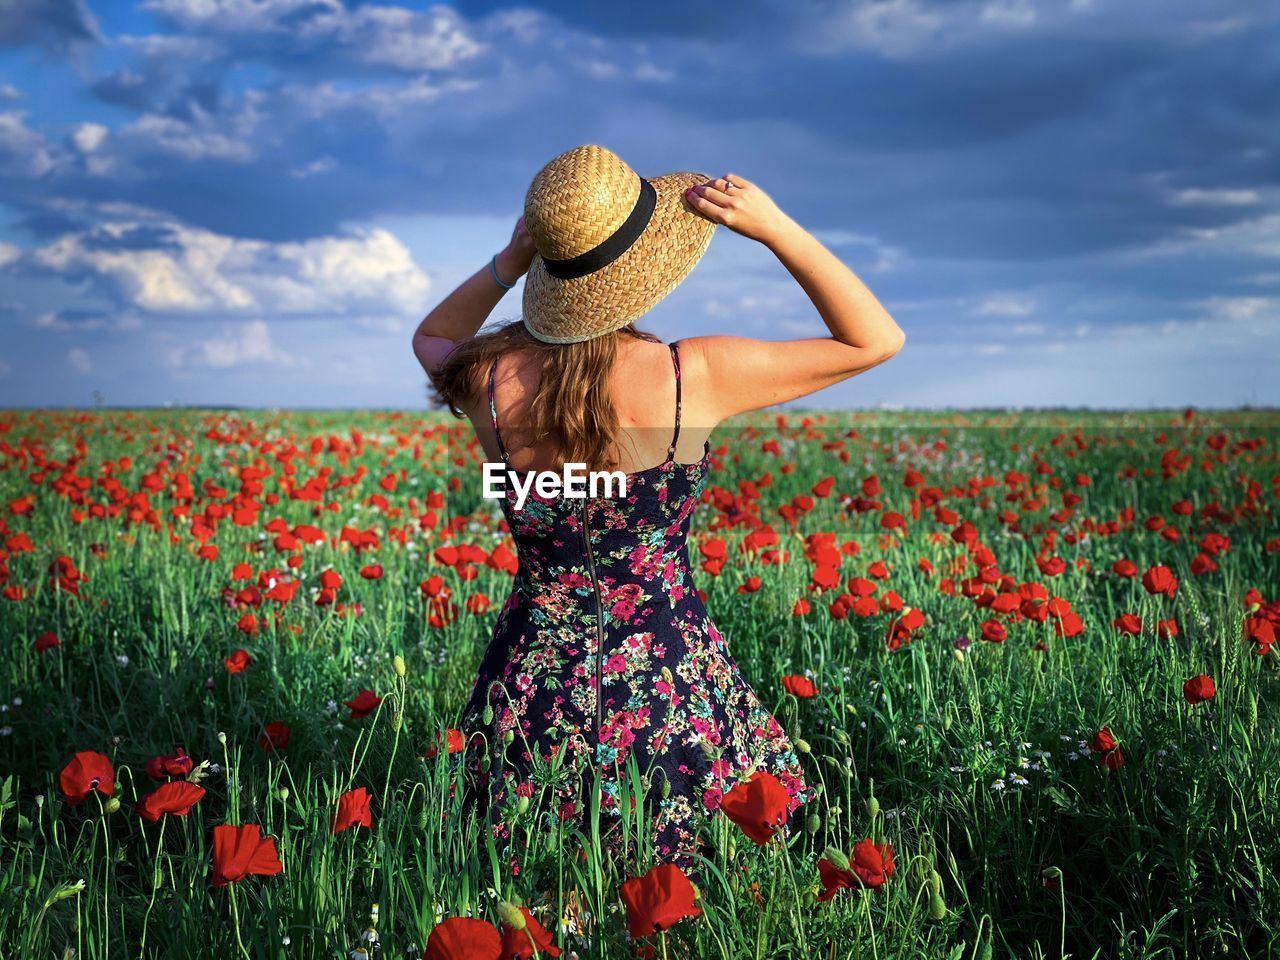 Rear view of woman wearing hat and dress in a field of poppies